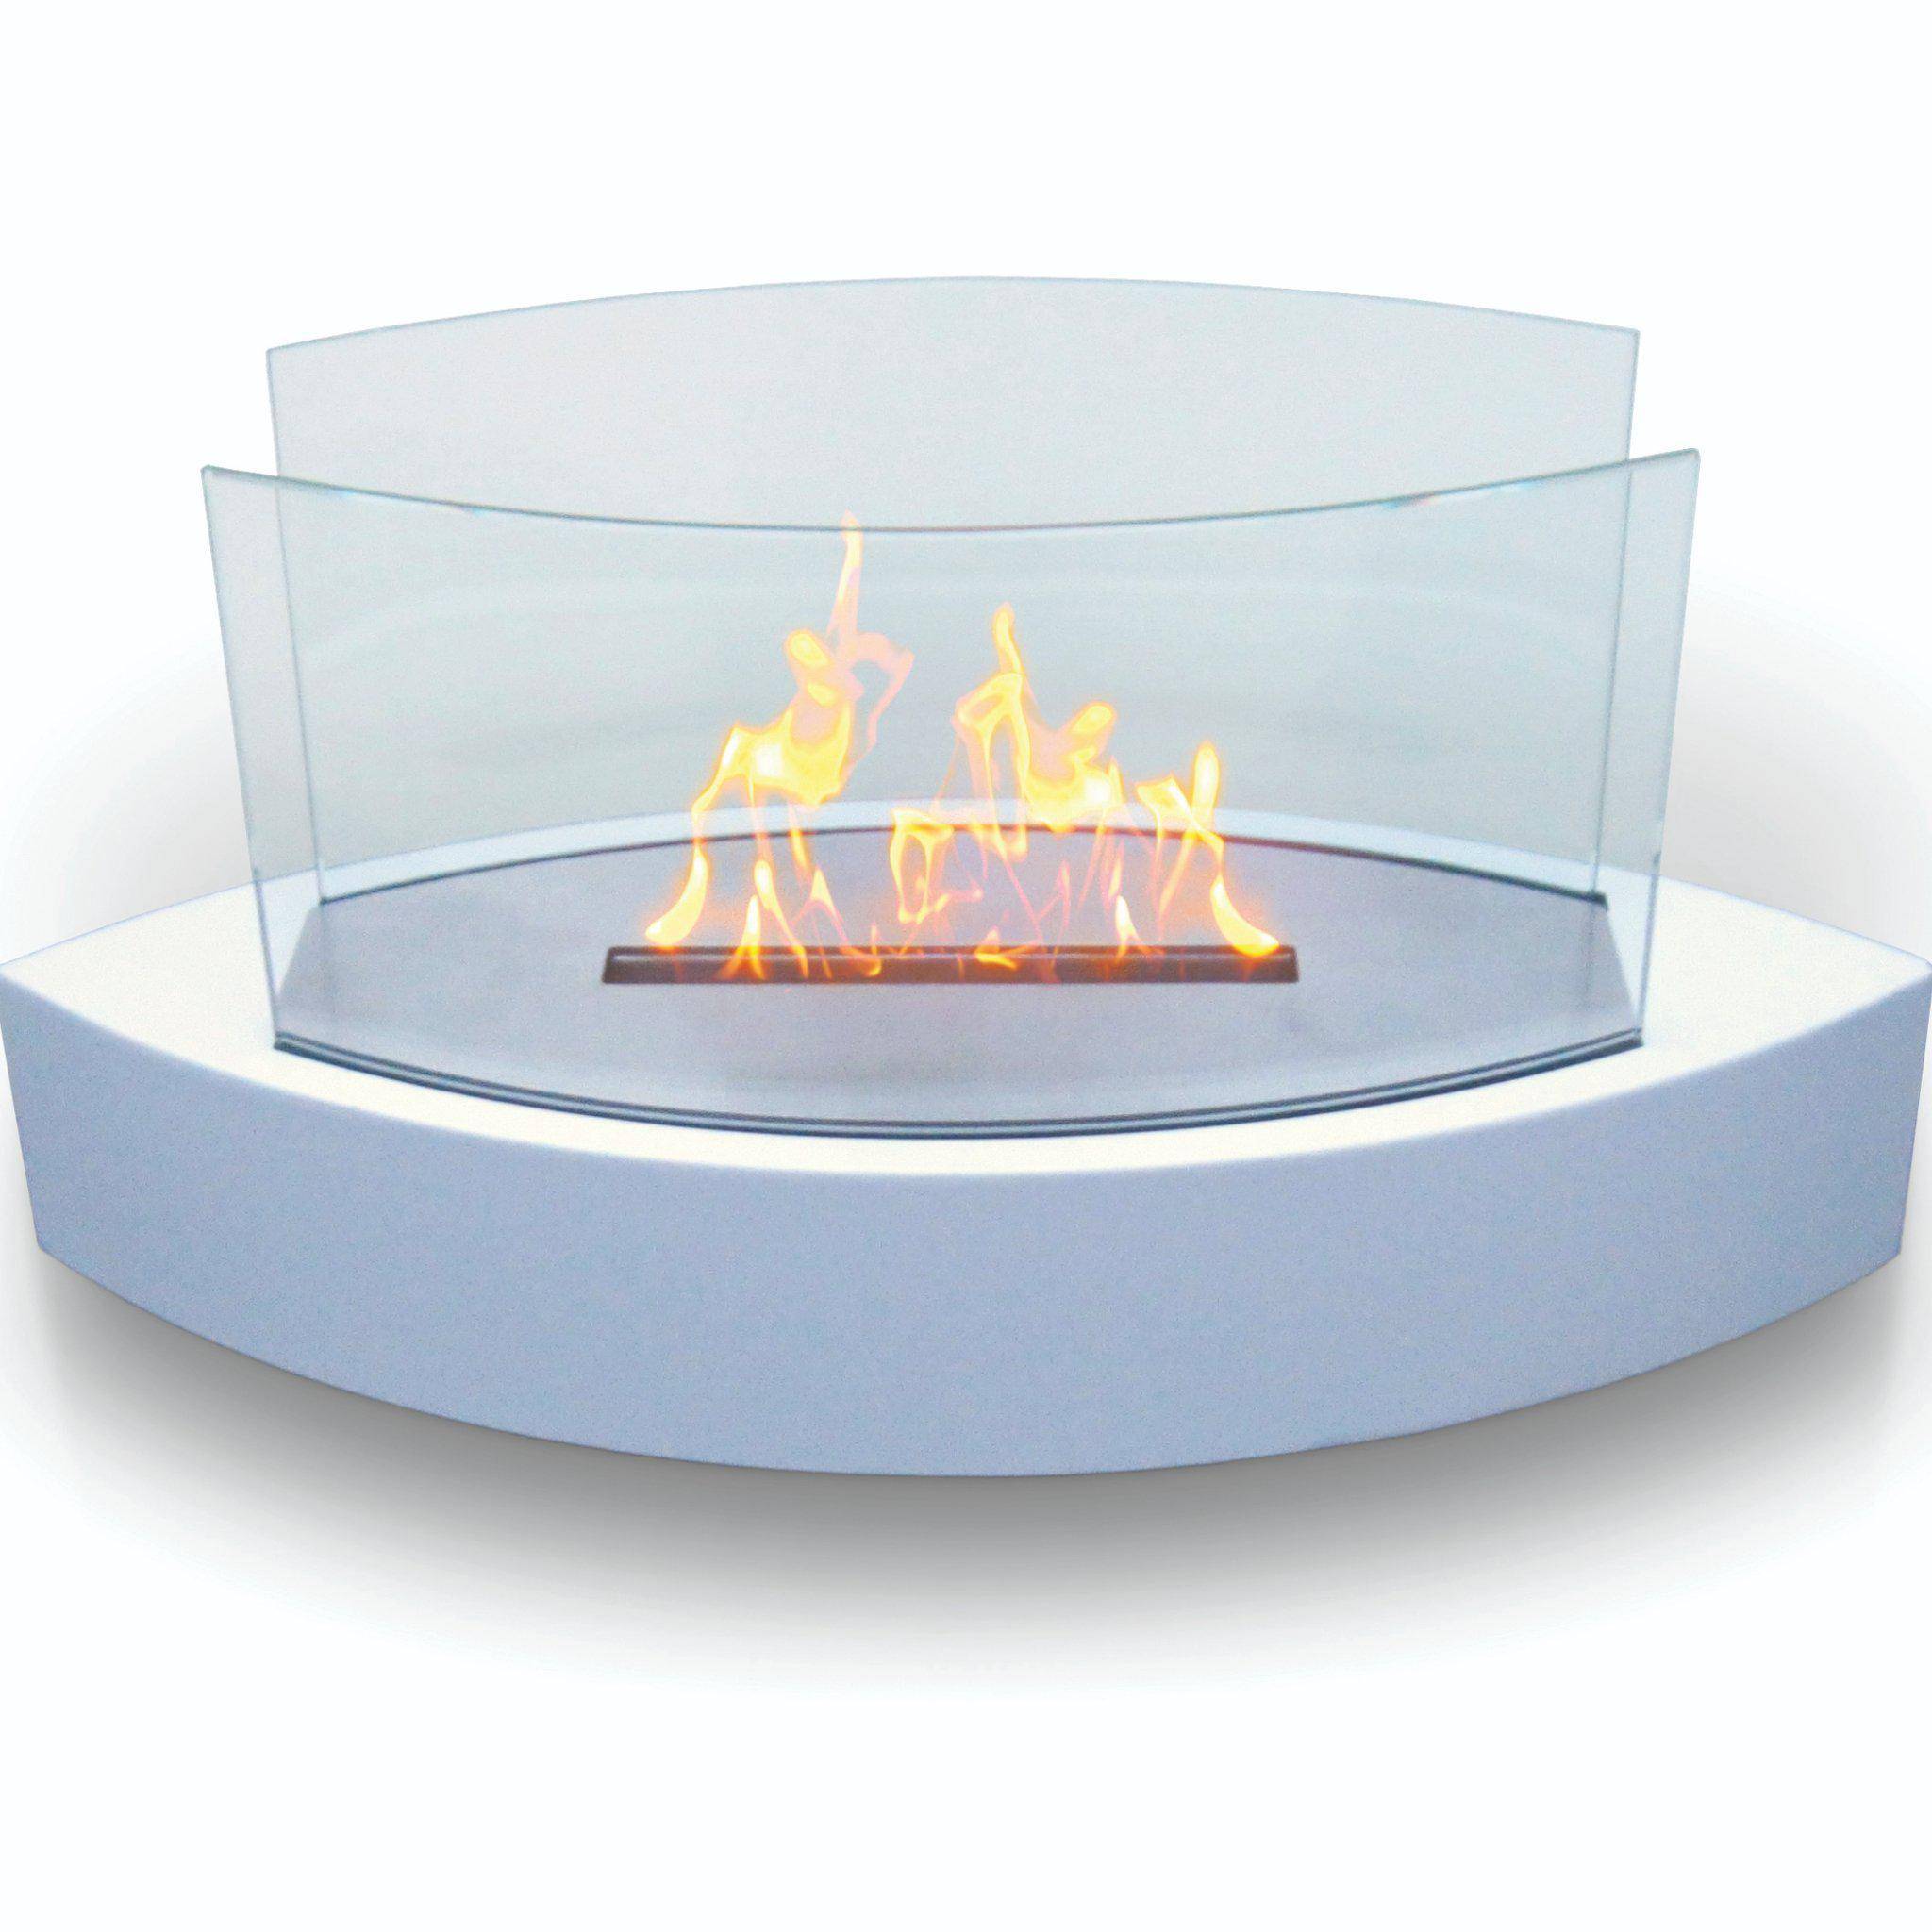 Anywhere Fireplace Lexington Tabletop Fireplace-Modern Ethanol Fireplaces